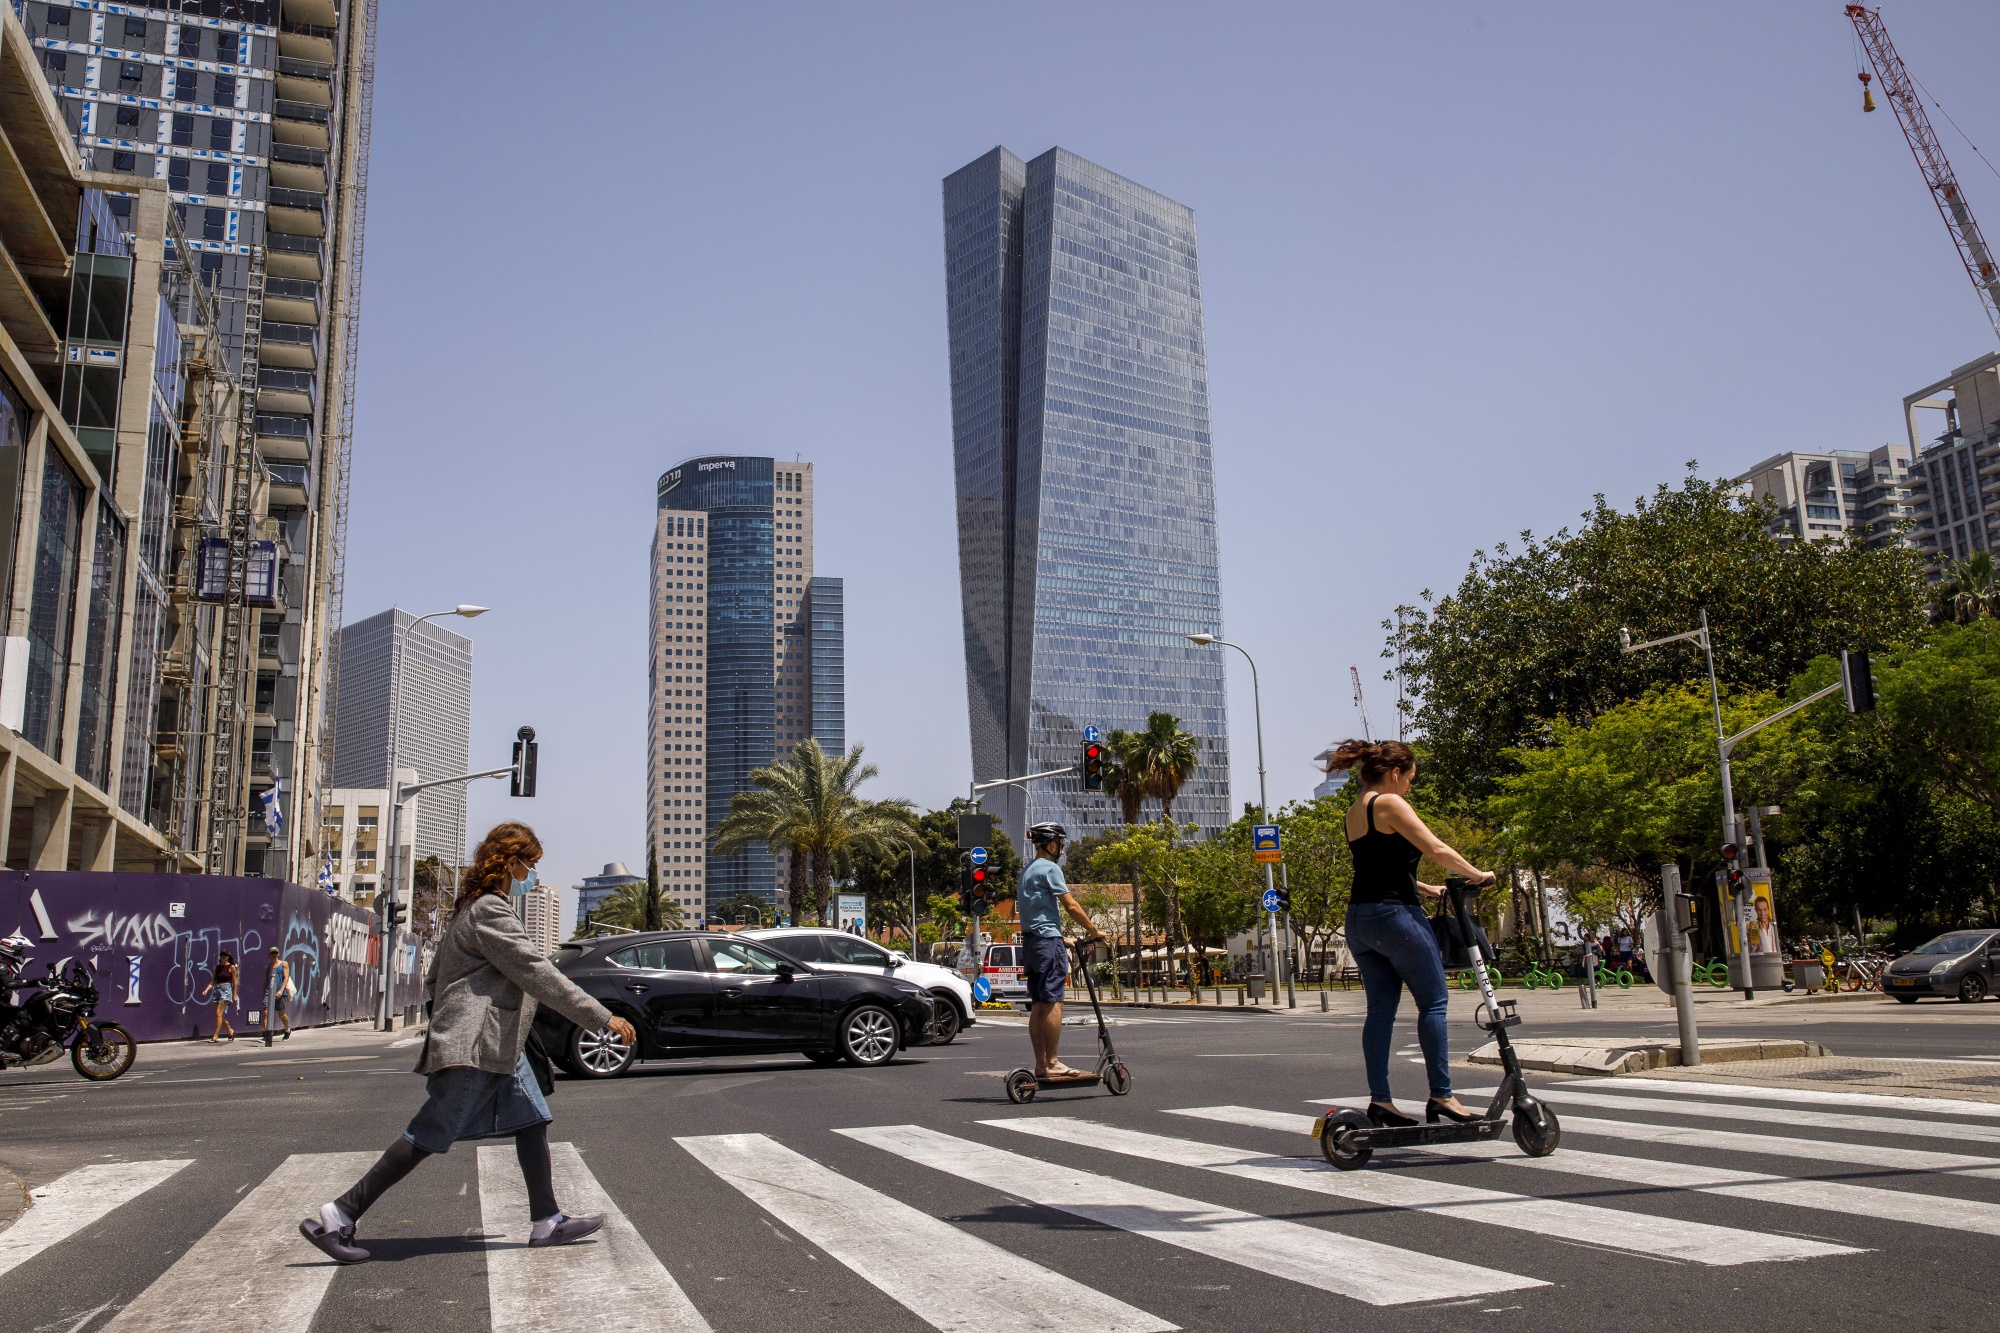 Commuters cross a street with the Azrieli Tower skyscraper in the background on&nbsp;April 30, 2021. An influx of tech workers has brought more e-scooters to&nbsp;Tel Aviv’s streets.&nbsp;